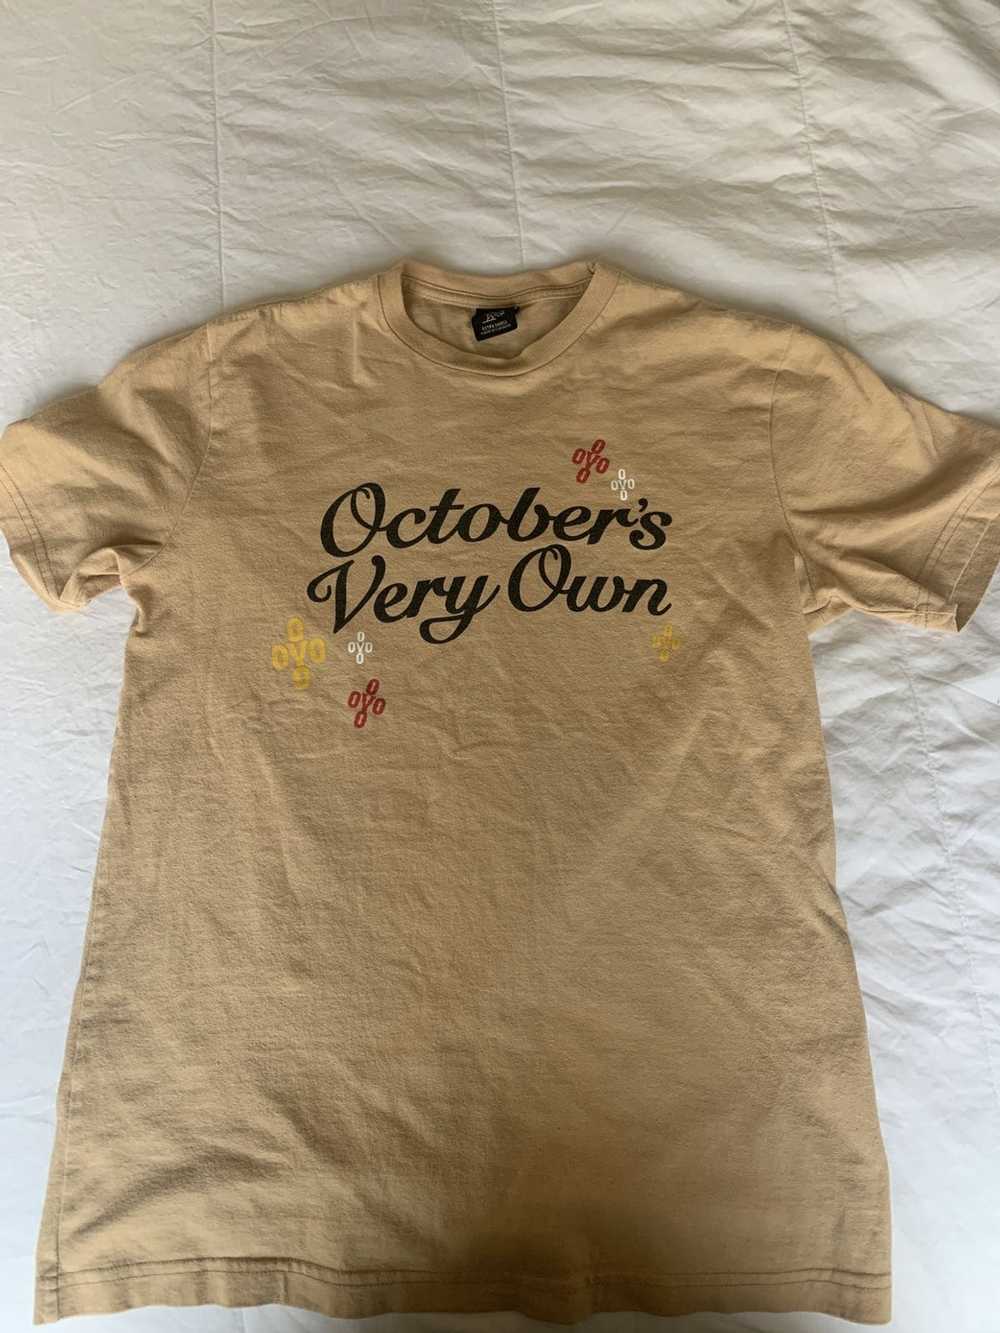 Octobers Very Own October’s Very Own Design Tee - image 1